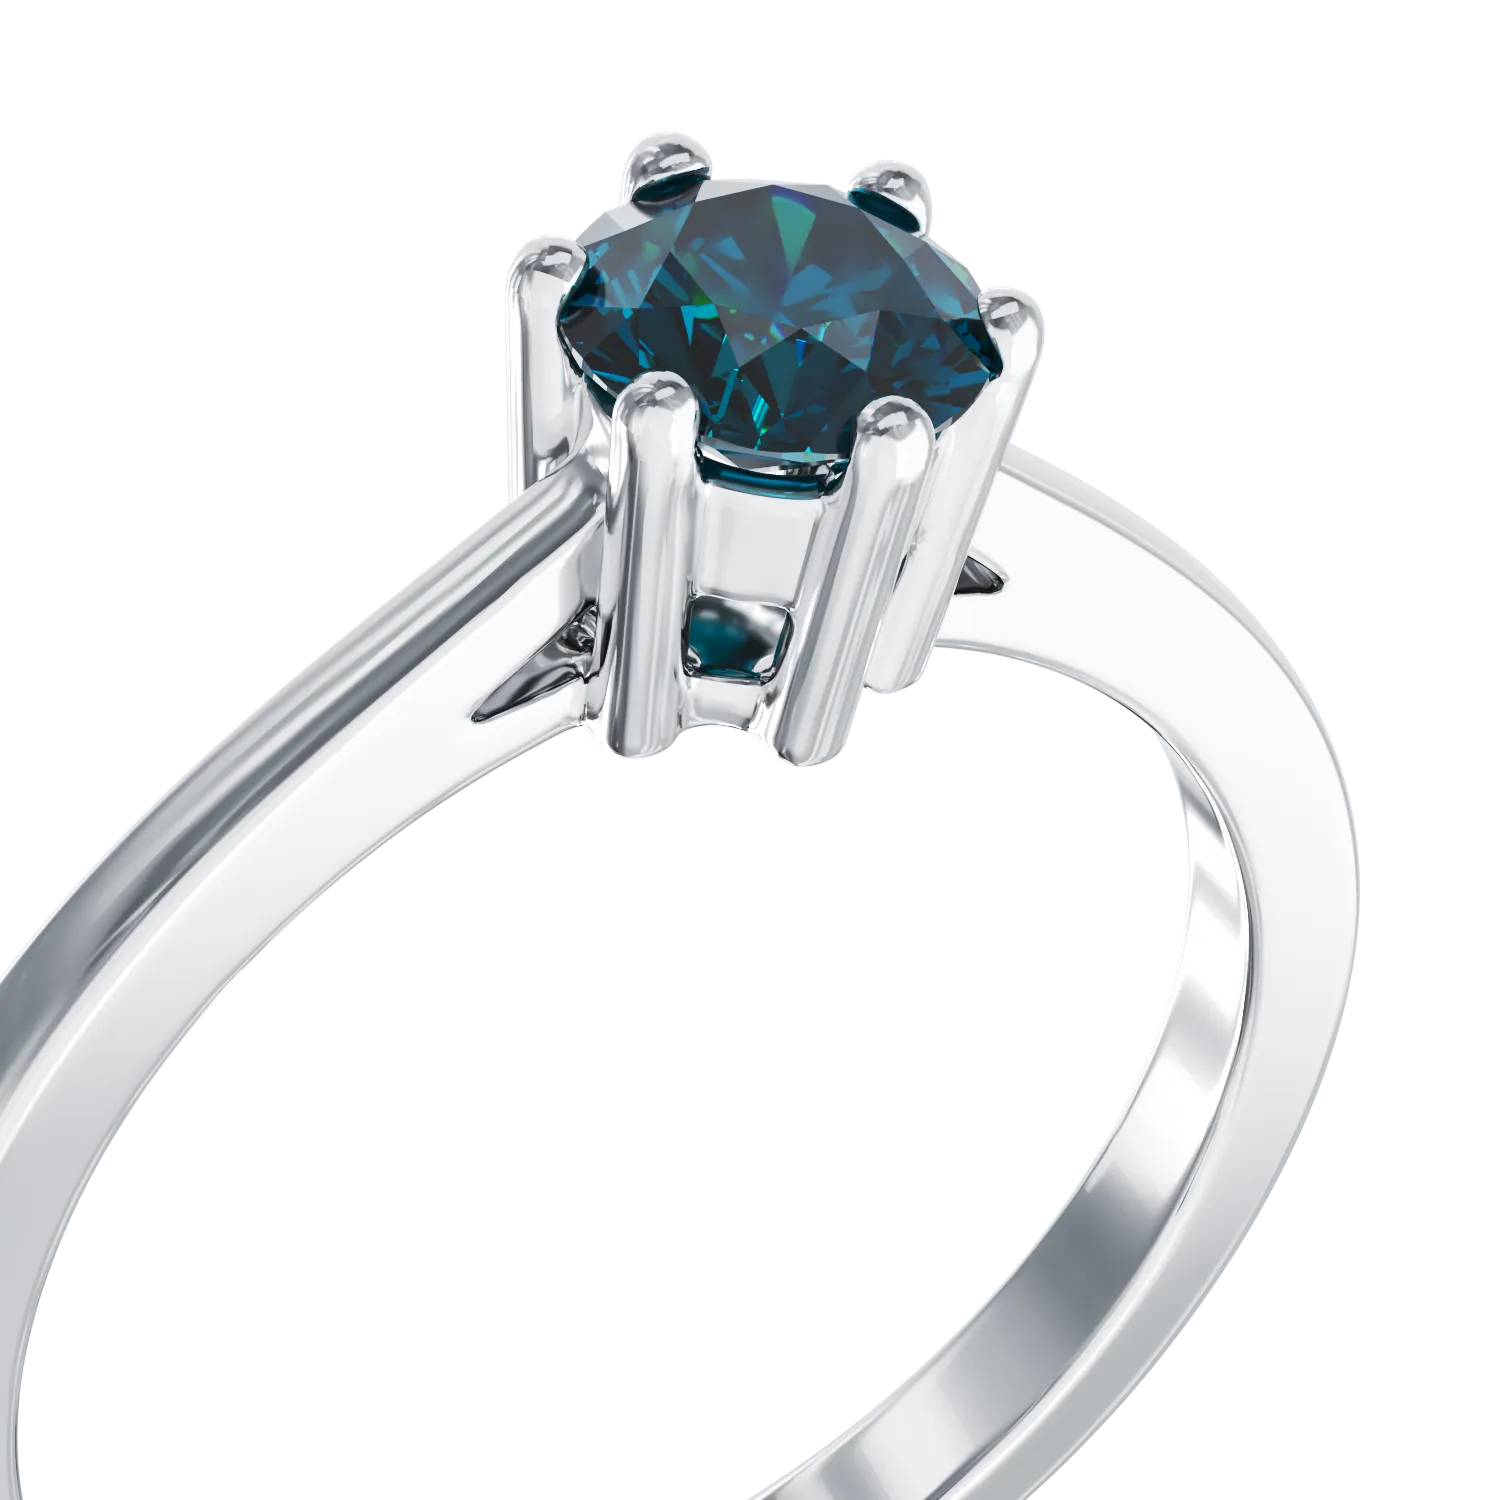 18K white gold engagement ring with 0.51ct blue diamond